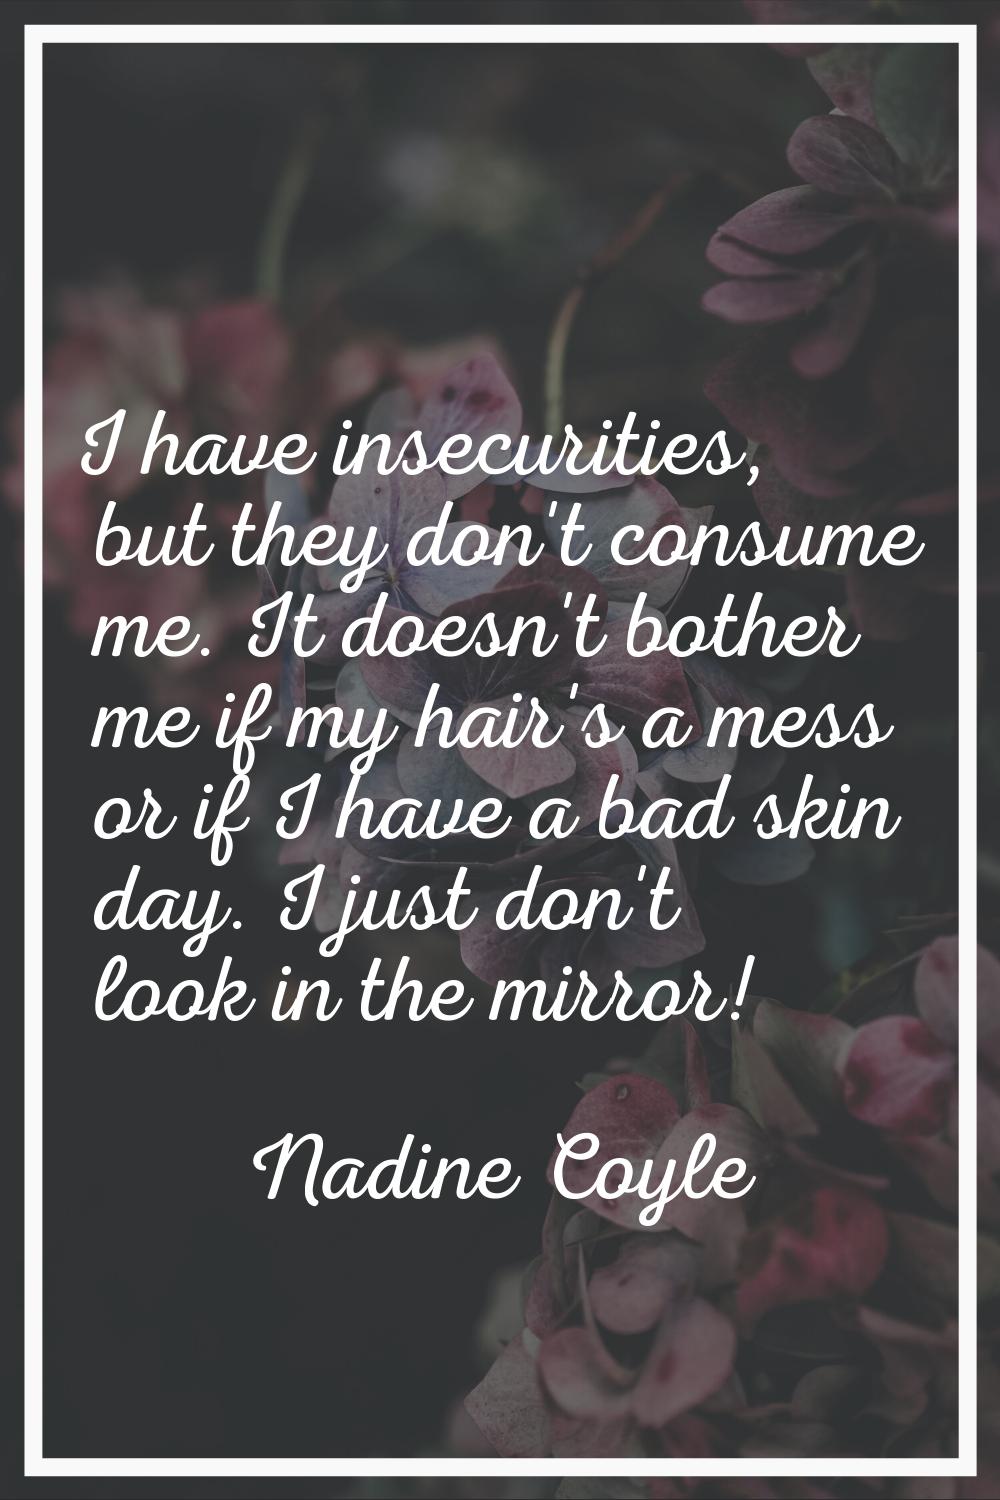 I have insecurities, but they don't consume me. It doesn't bother me if my hair's a mess or if I ha